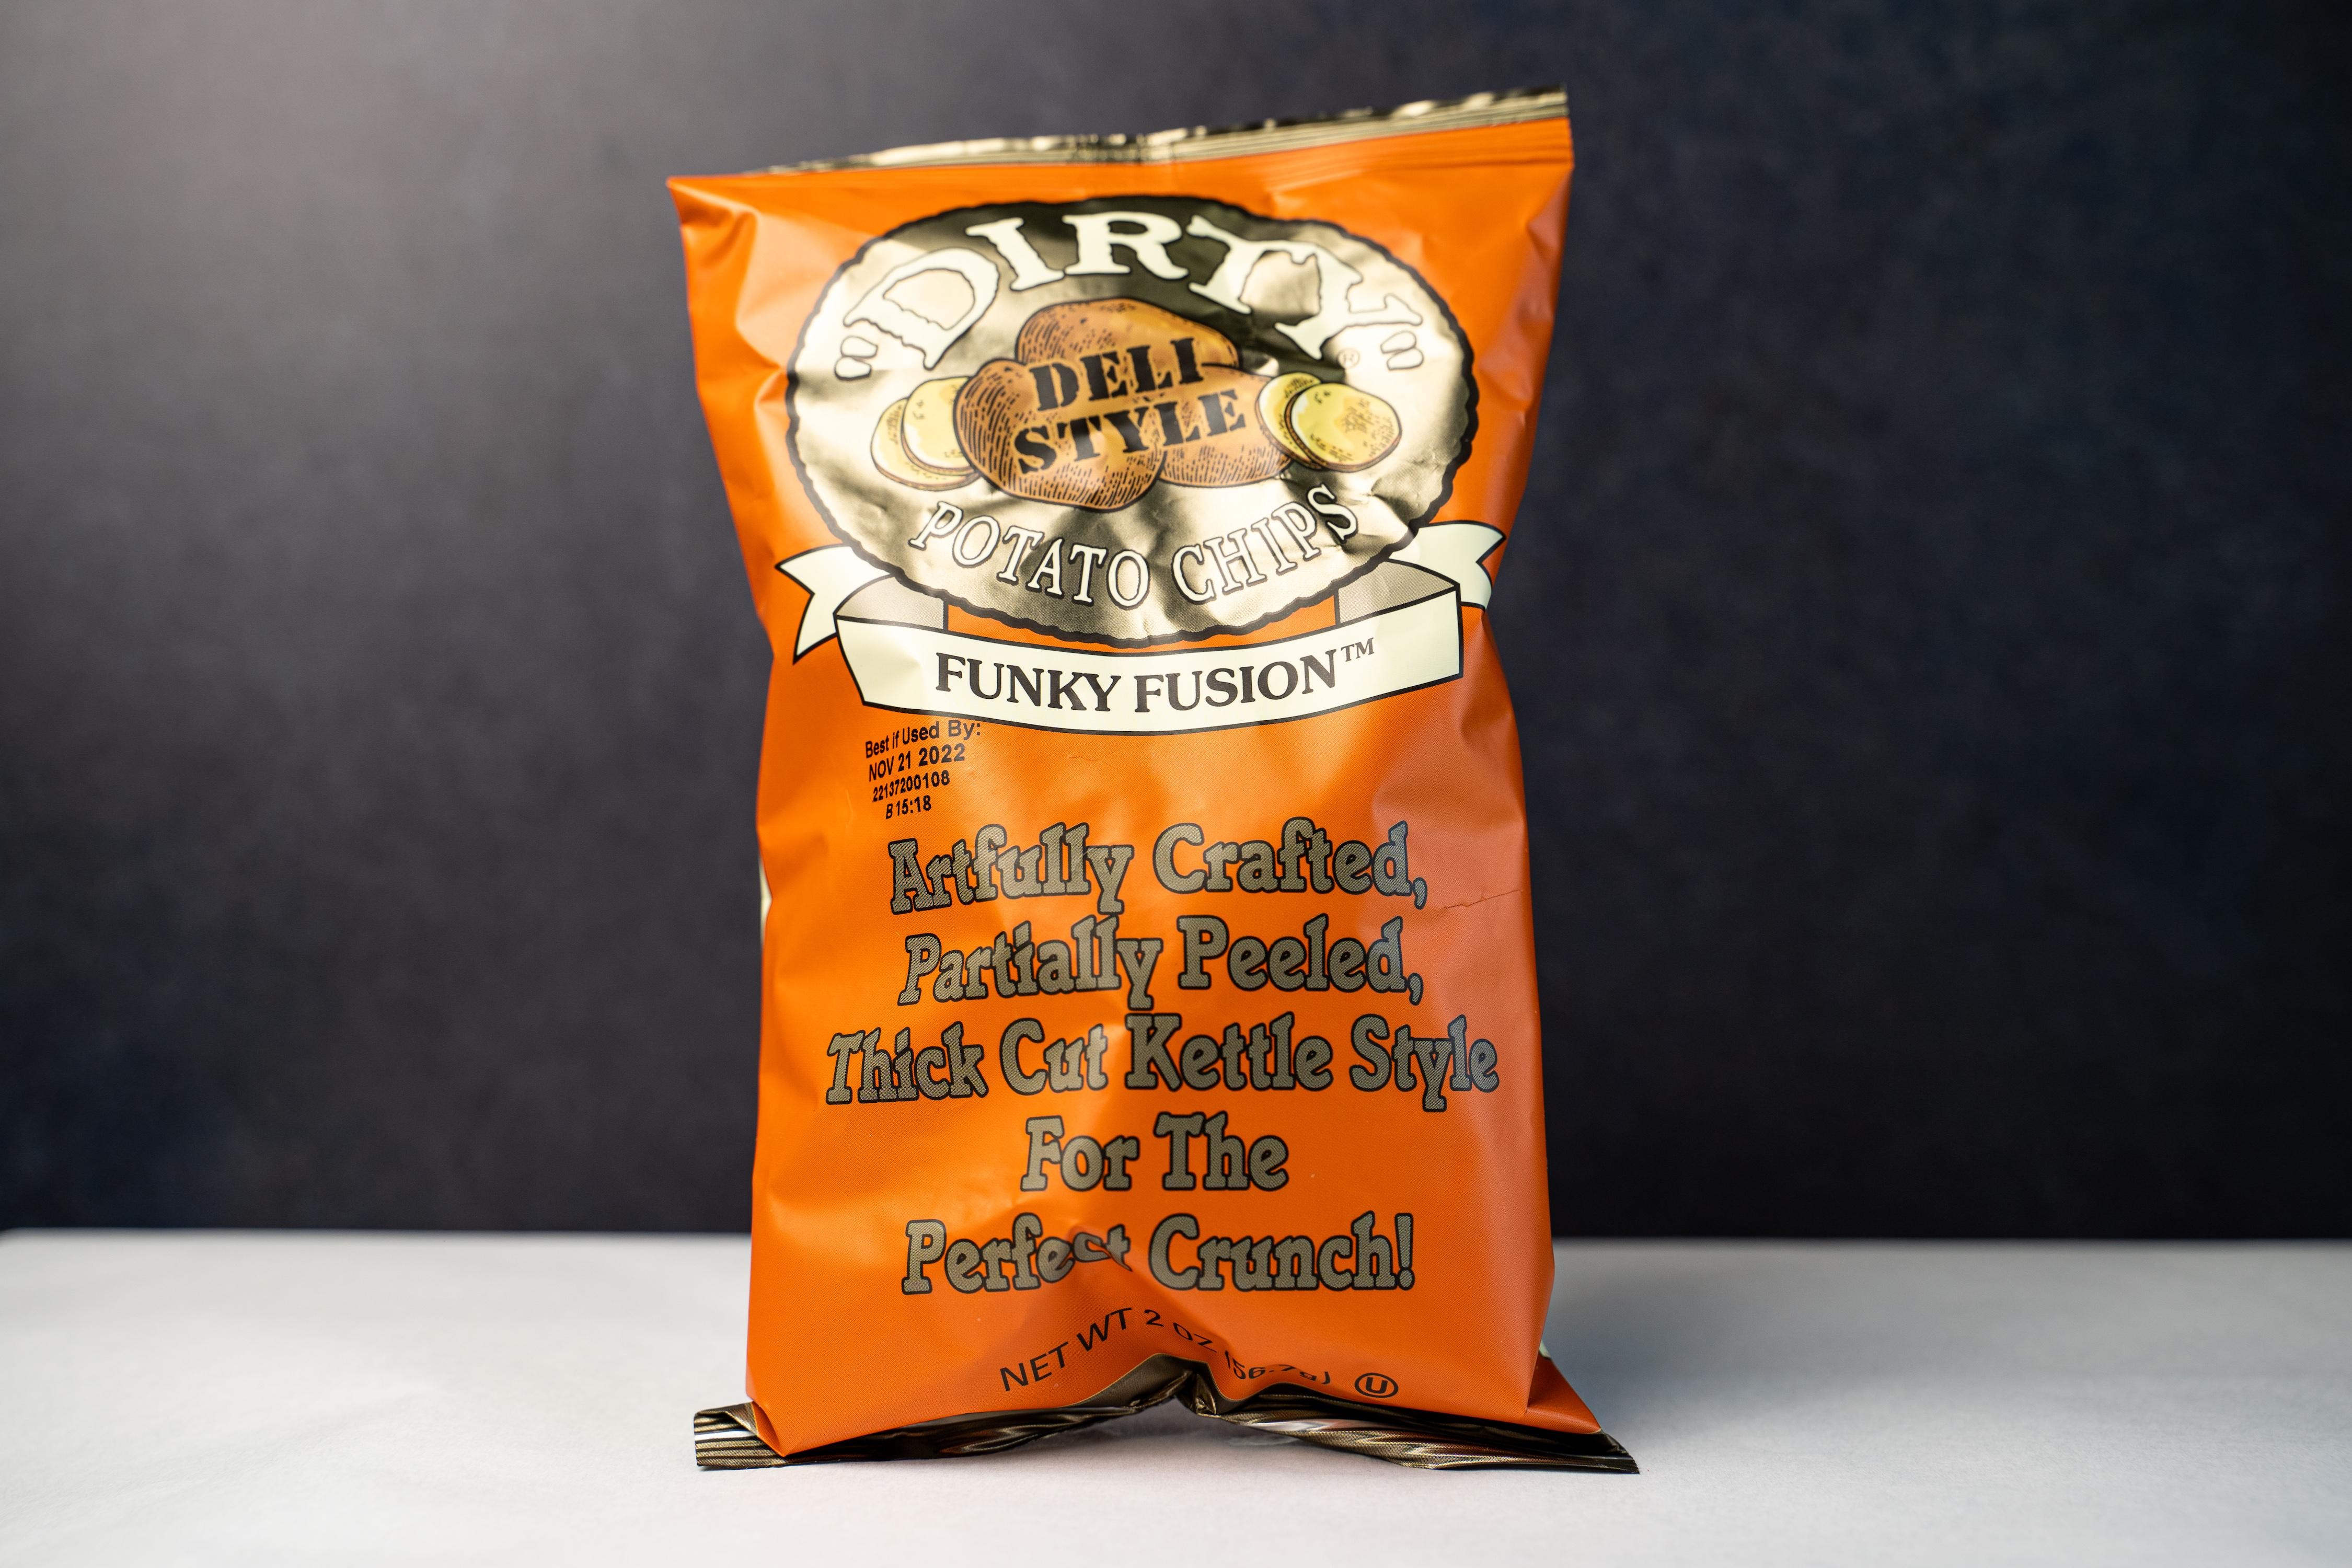 "Dirty"  Funky Fusion Potato Chips